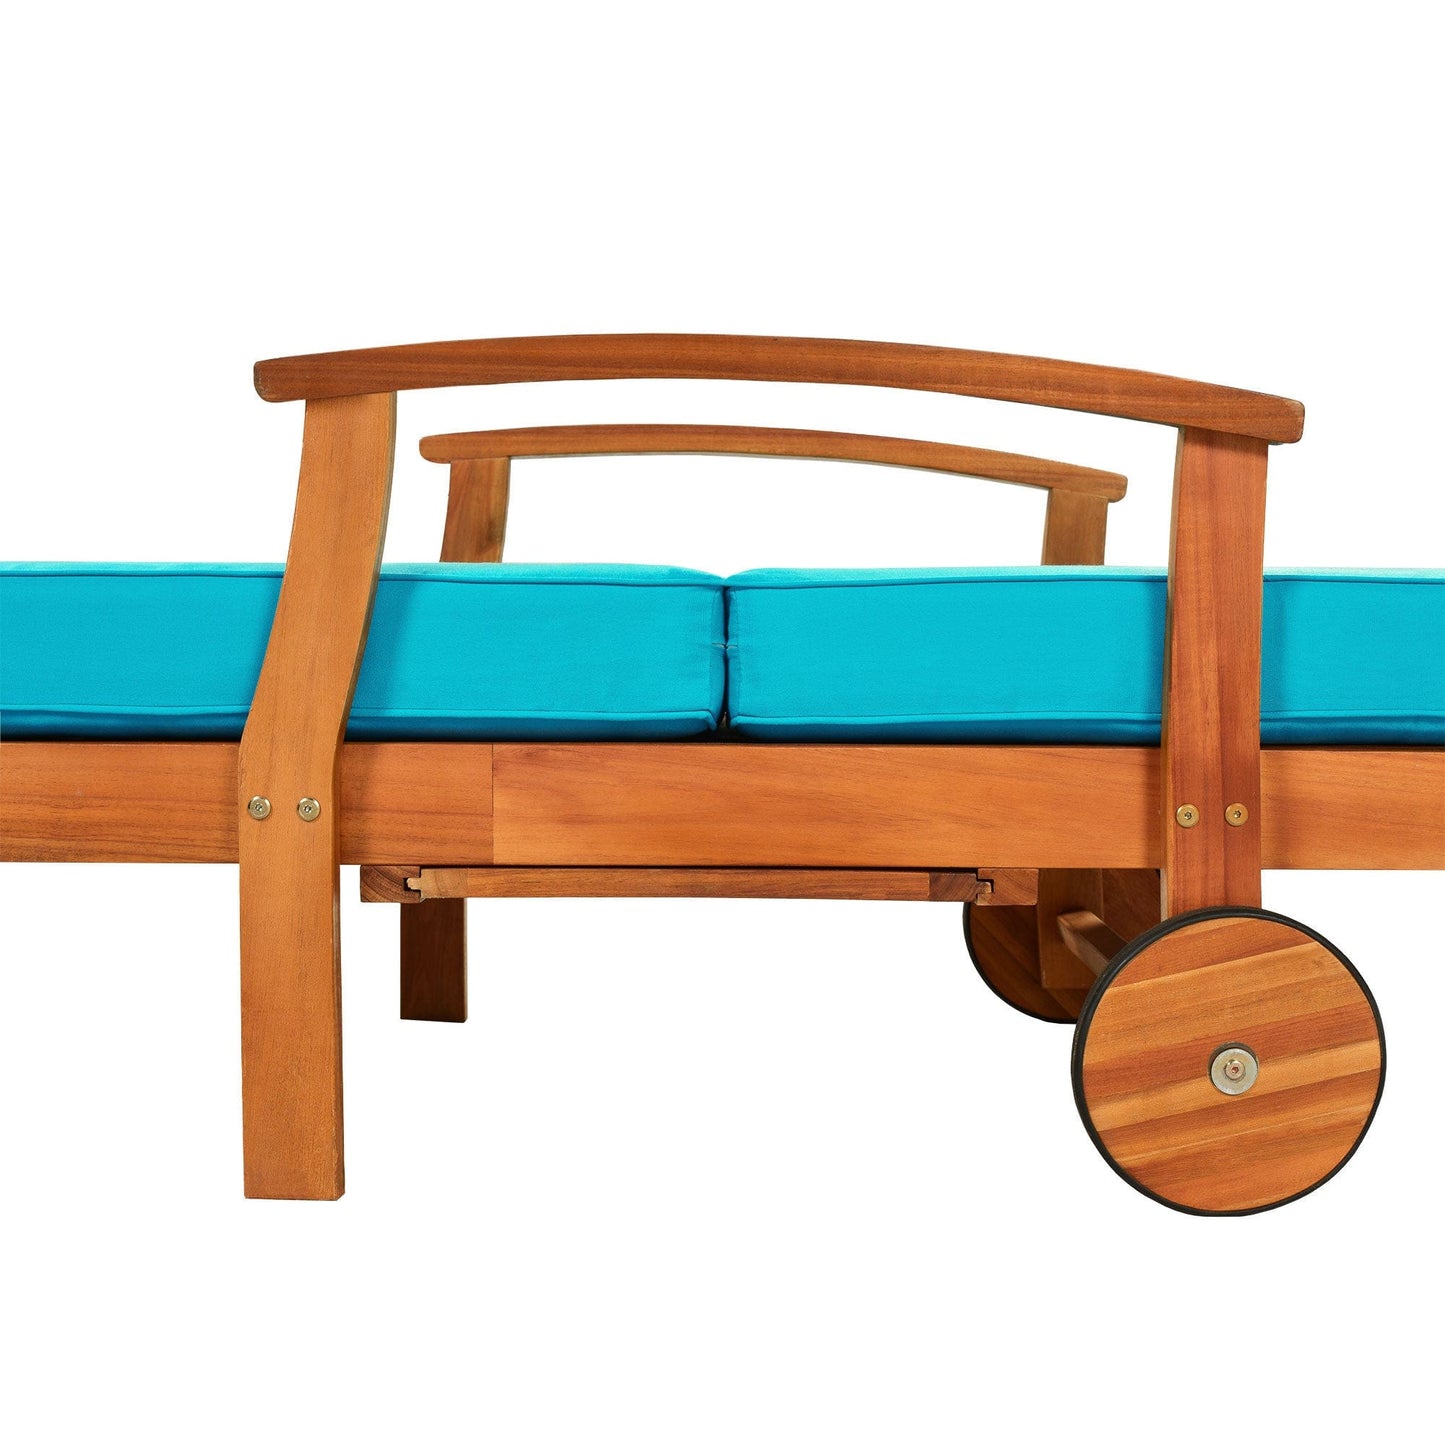 1st Choice Furniture Direct 1st Choice Outdoor Wood Chaise Lounge Daybed with Wheels & Cup Table